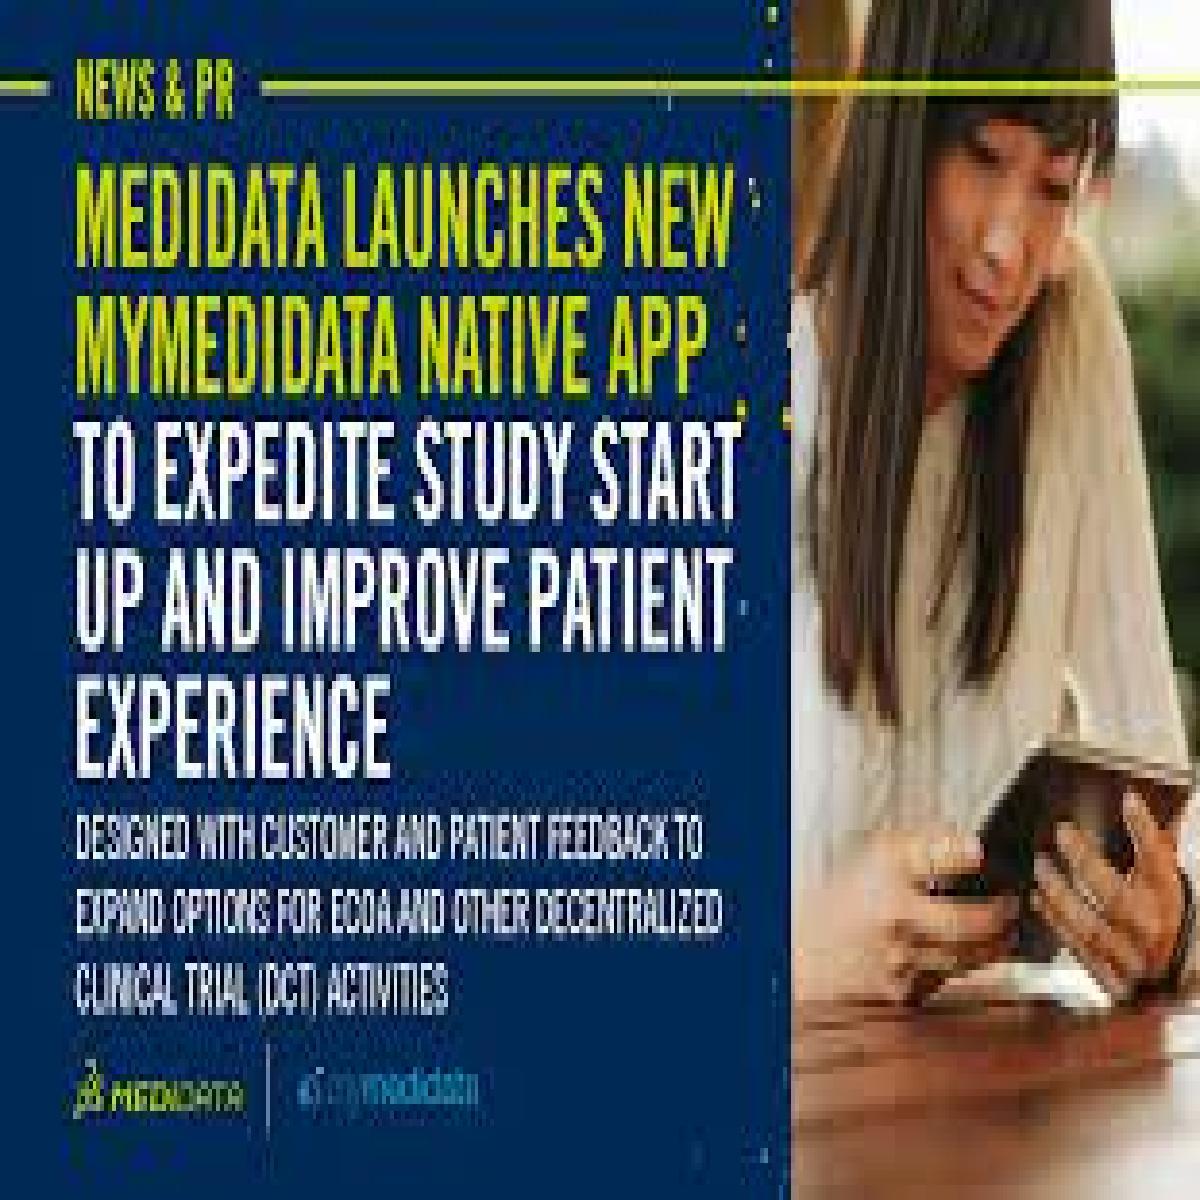 Medidata Launches New myMedidata Native App to Expedite Study Start Up and Improve Patient Experience